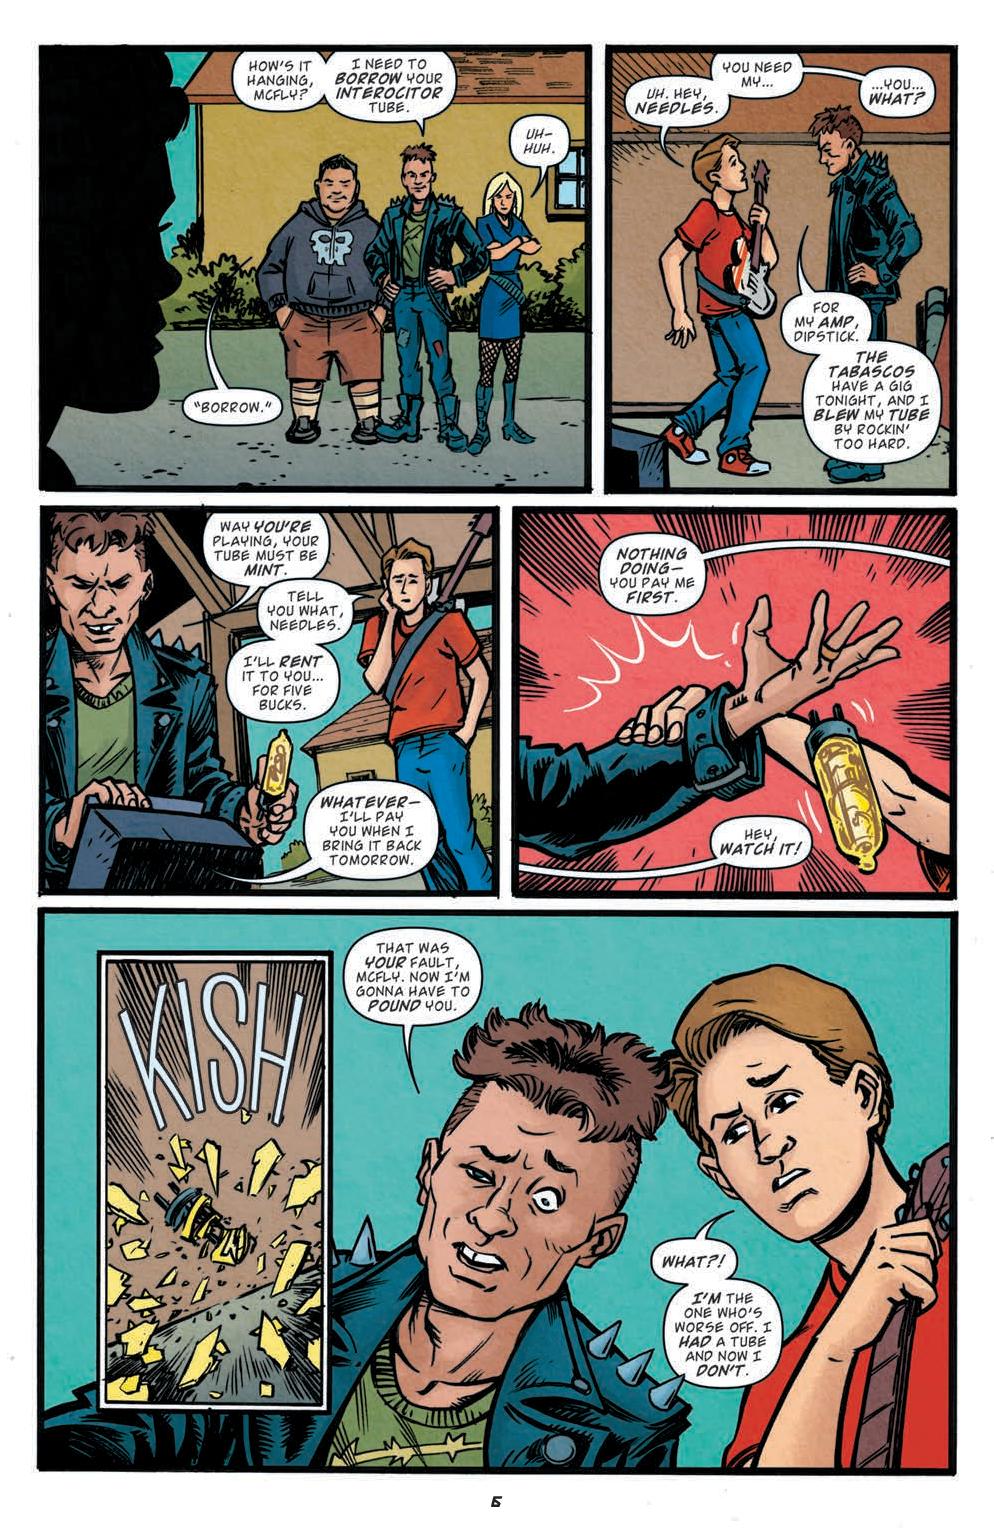 Back to the Future #1 Preview Page